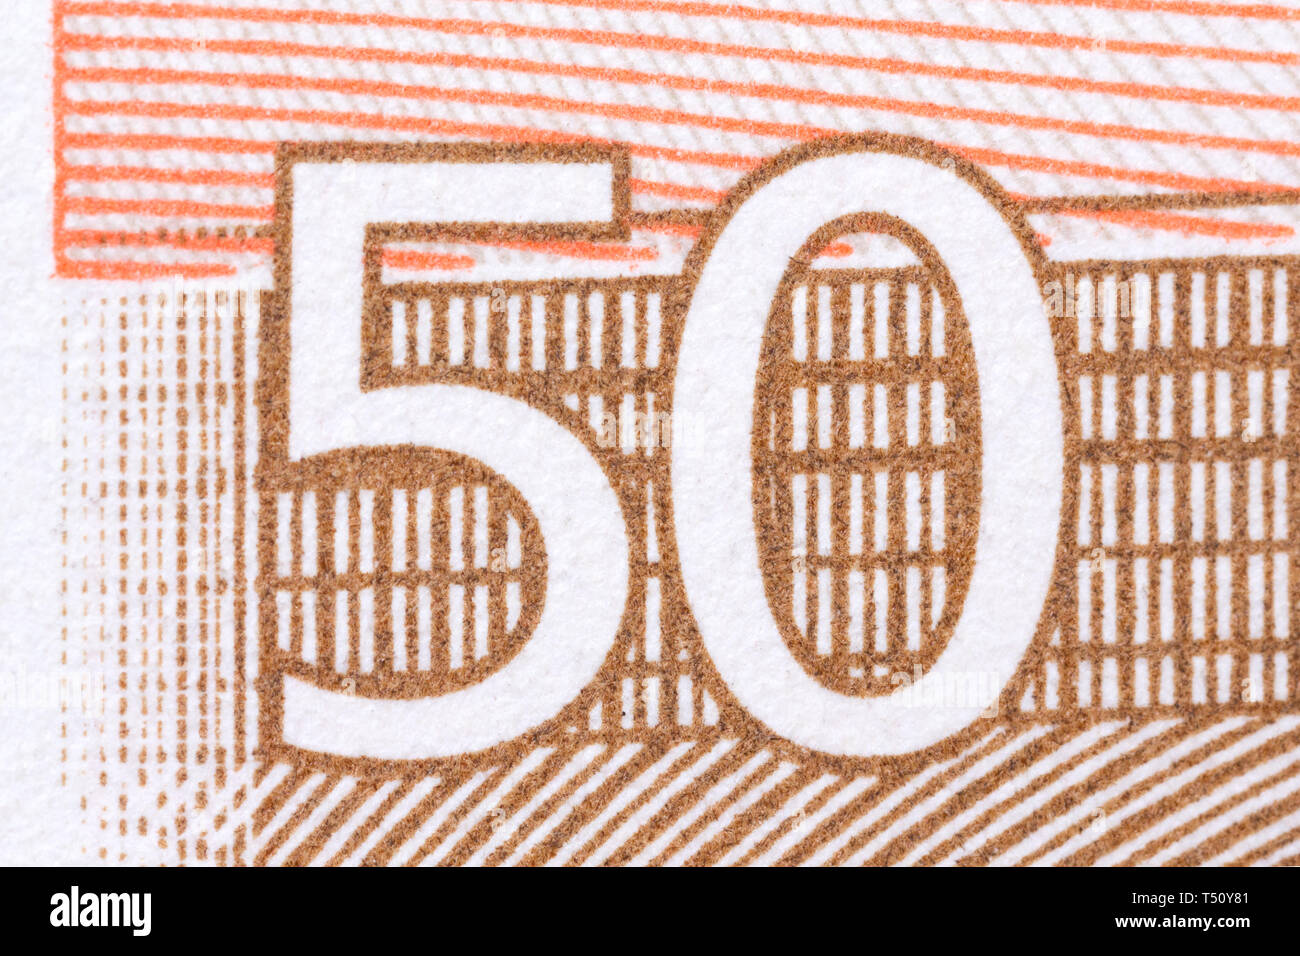 Fifty euros of the European Union photographed close up. Focus on number. Stock Photo